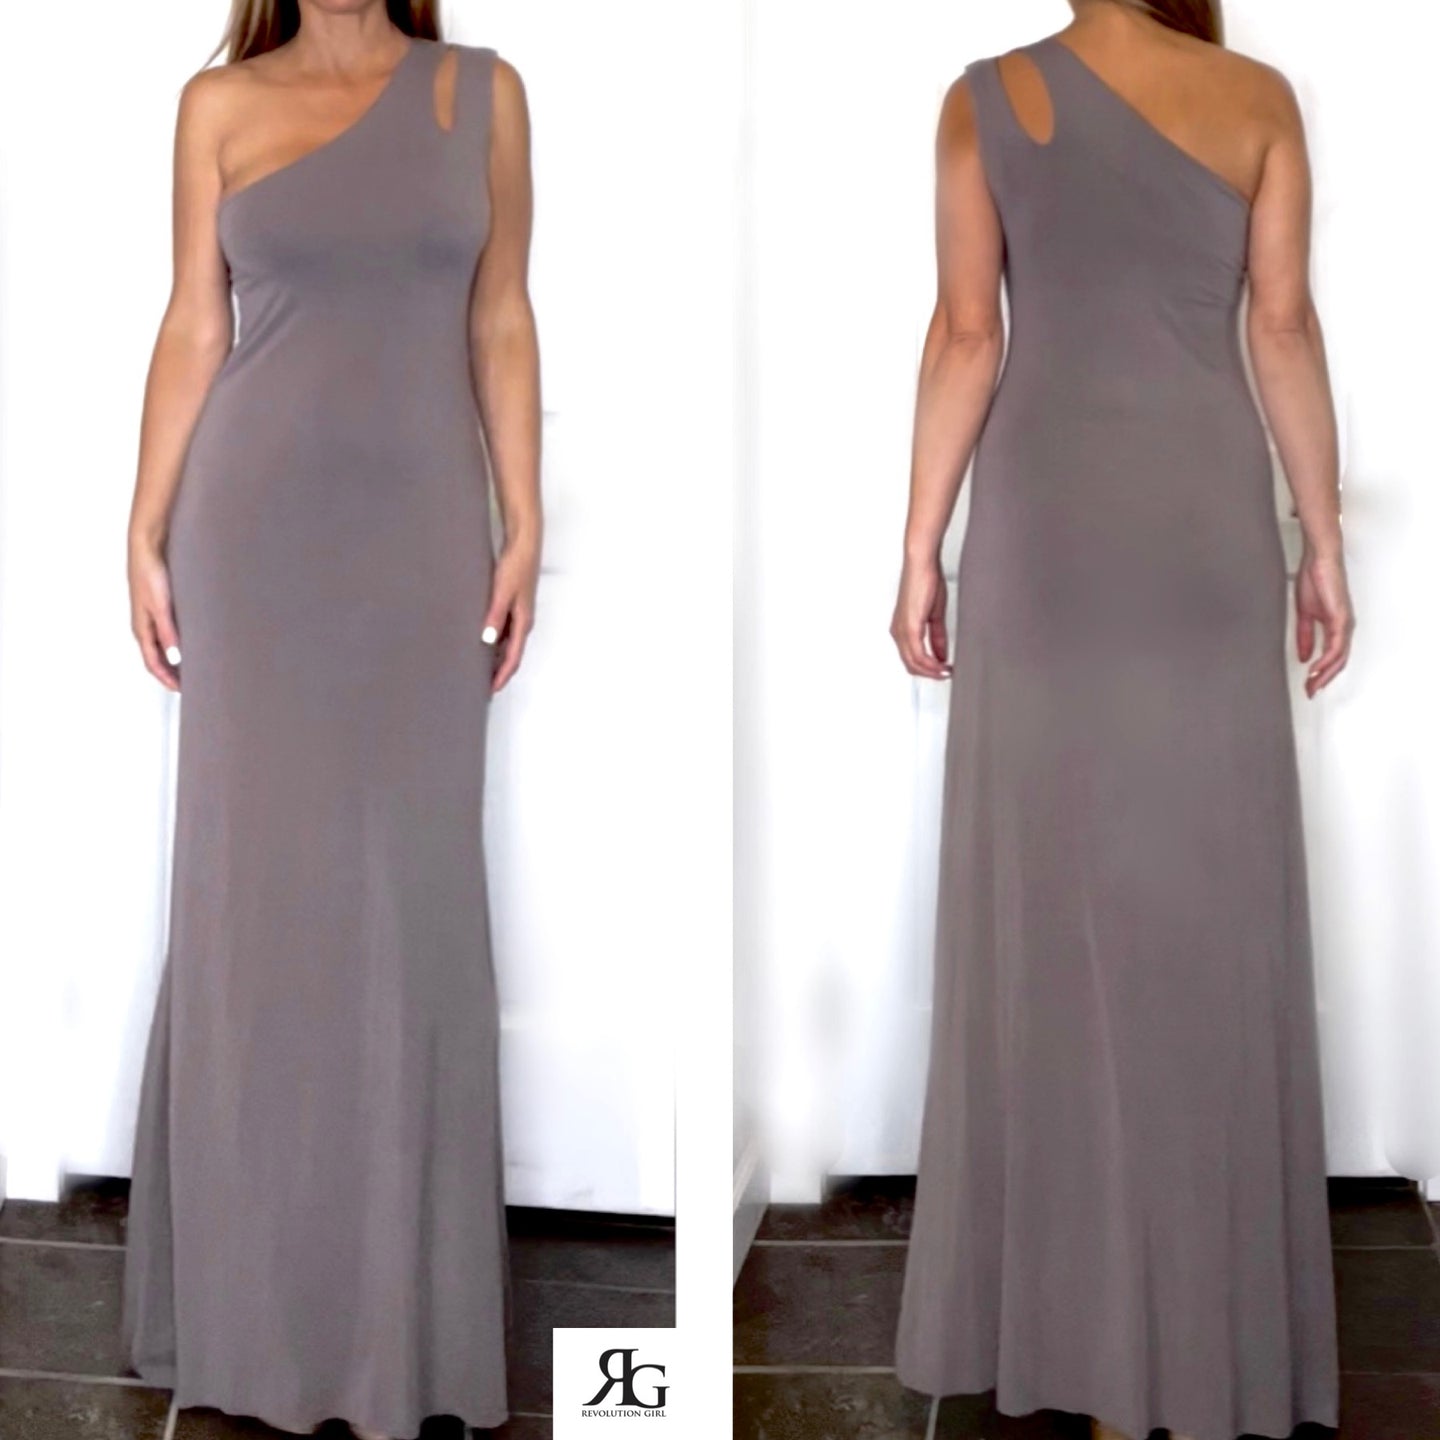 Taupe One Shoulder Soft Comfortable Long Maxi Dress by Revolution Girl ⭐️